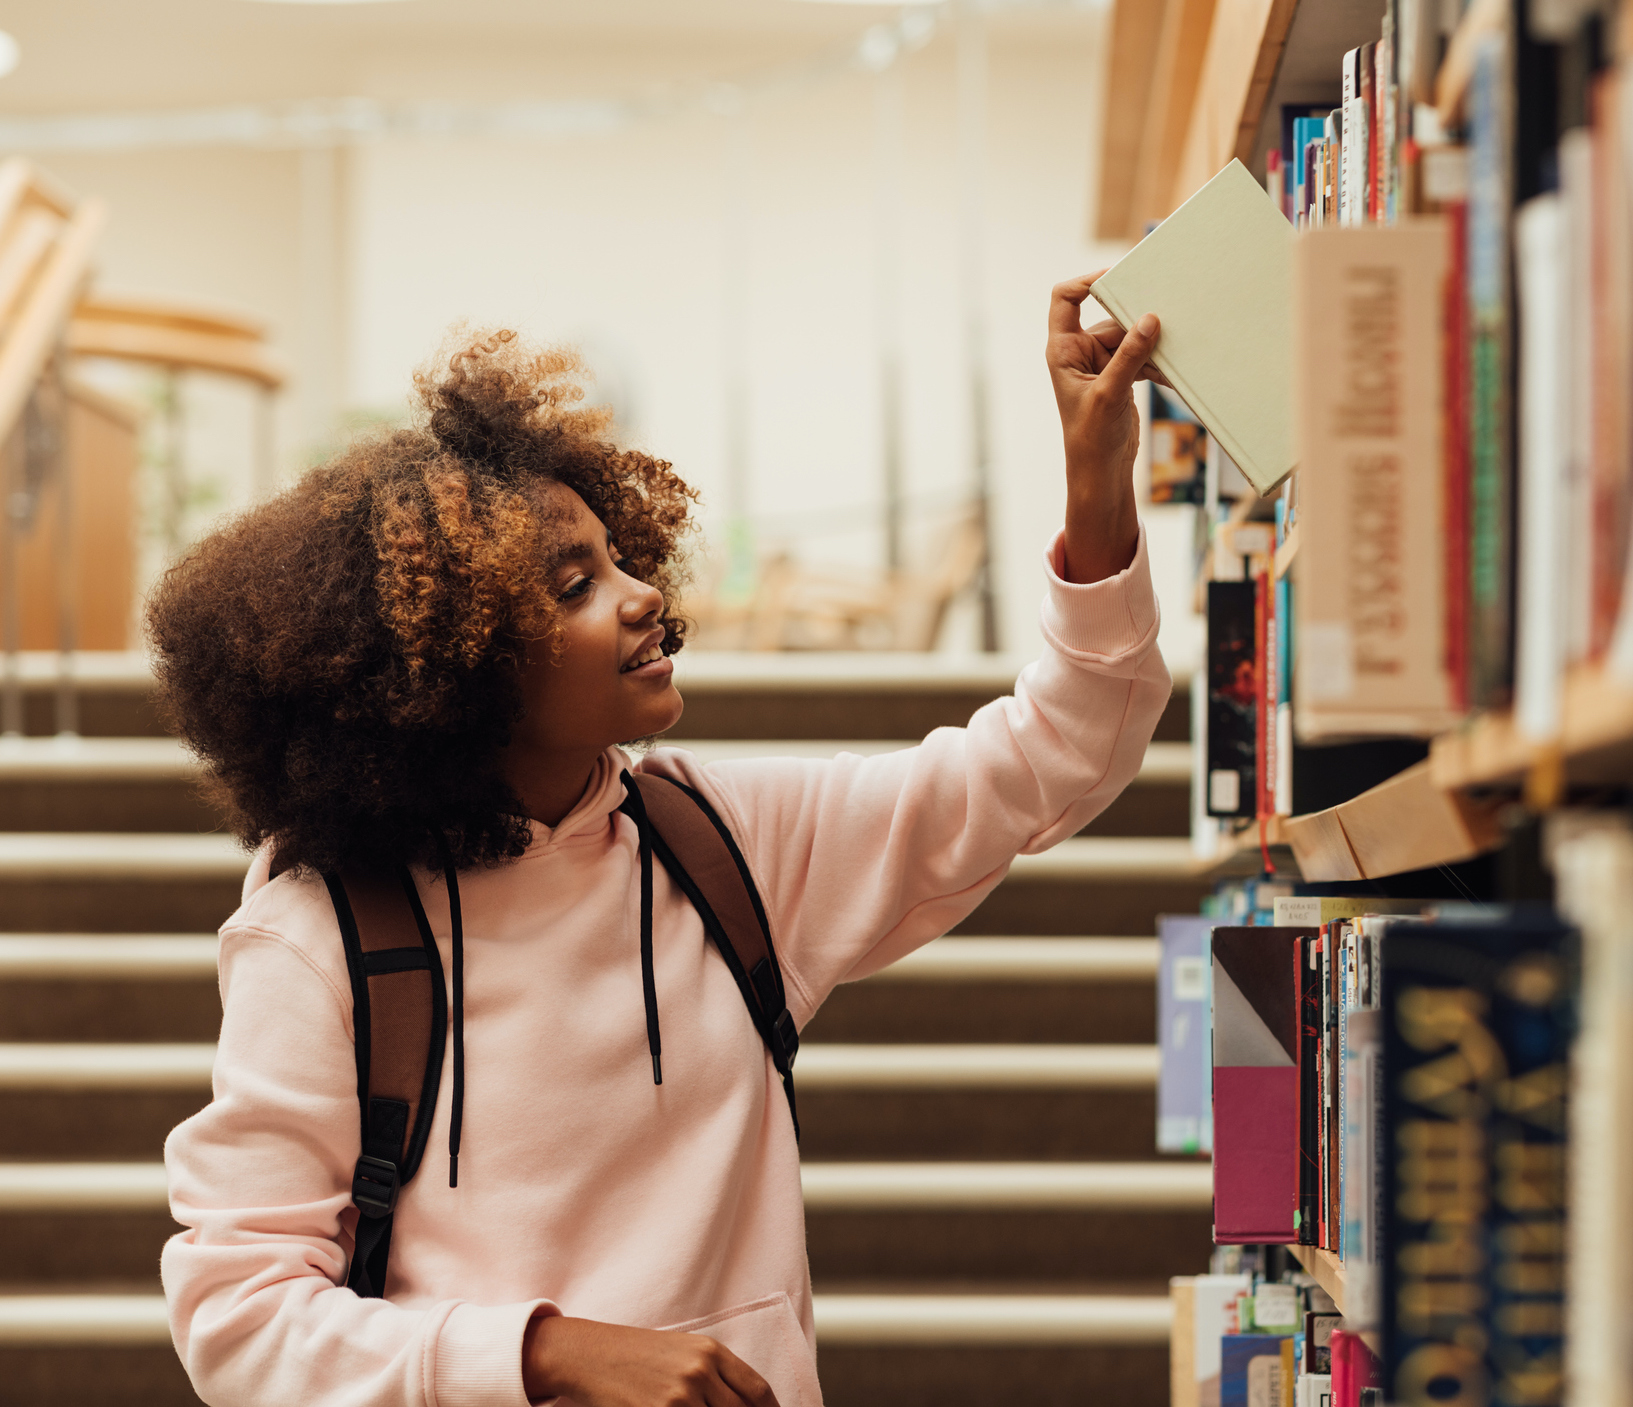 Photo. A girl is taking a book from a bookshelf in a library. She is wearing a pink hooded top and wearing a rucksack.